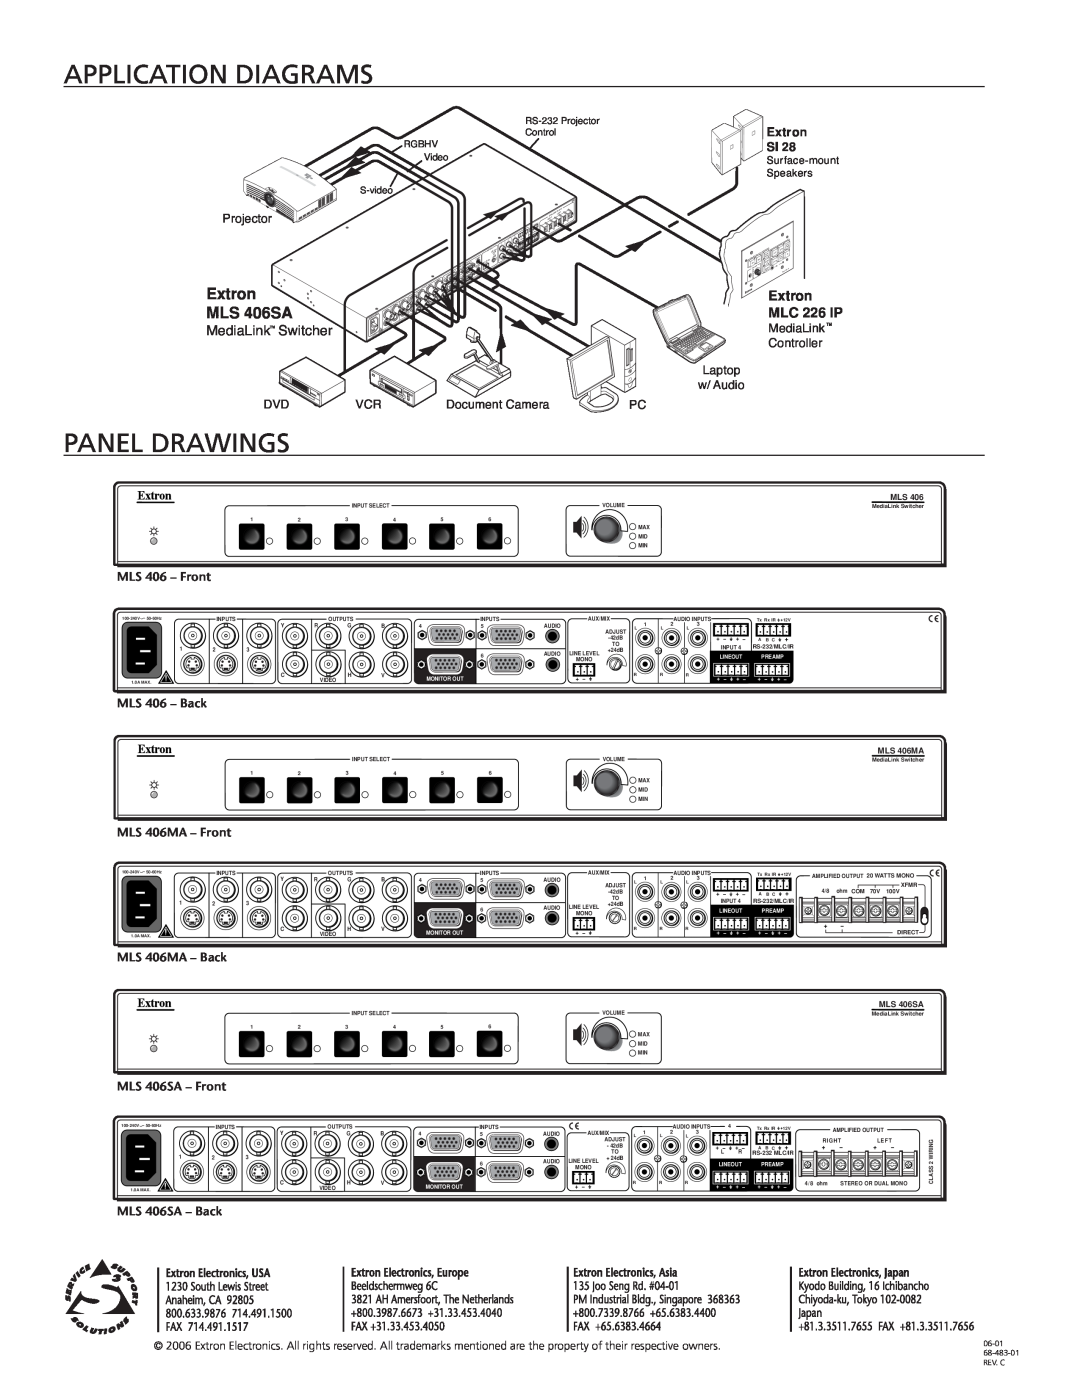 Extron electronic MLS 406 Series Application Diagrams, Panel drawings, Extron, MLS 406SA, MediaLink Switcher, MLC 226 IP 